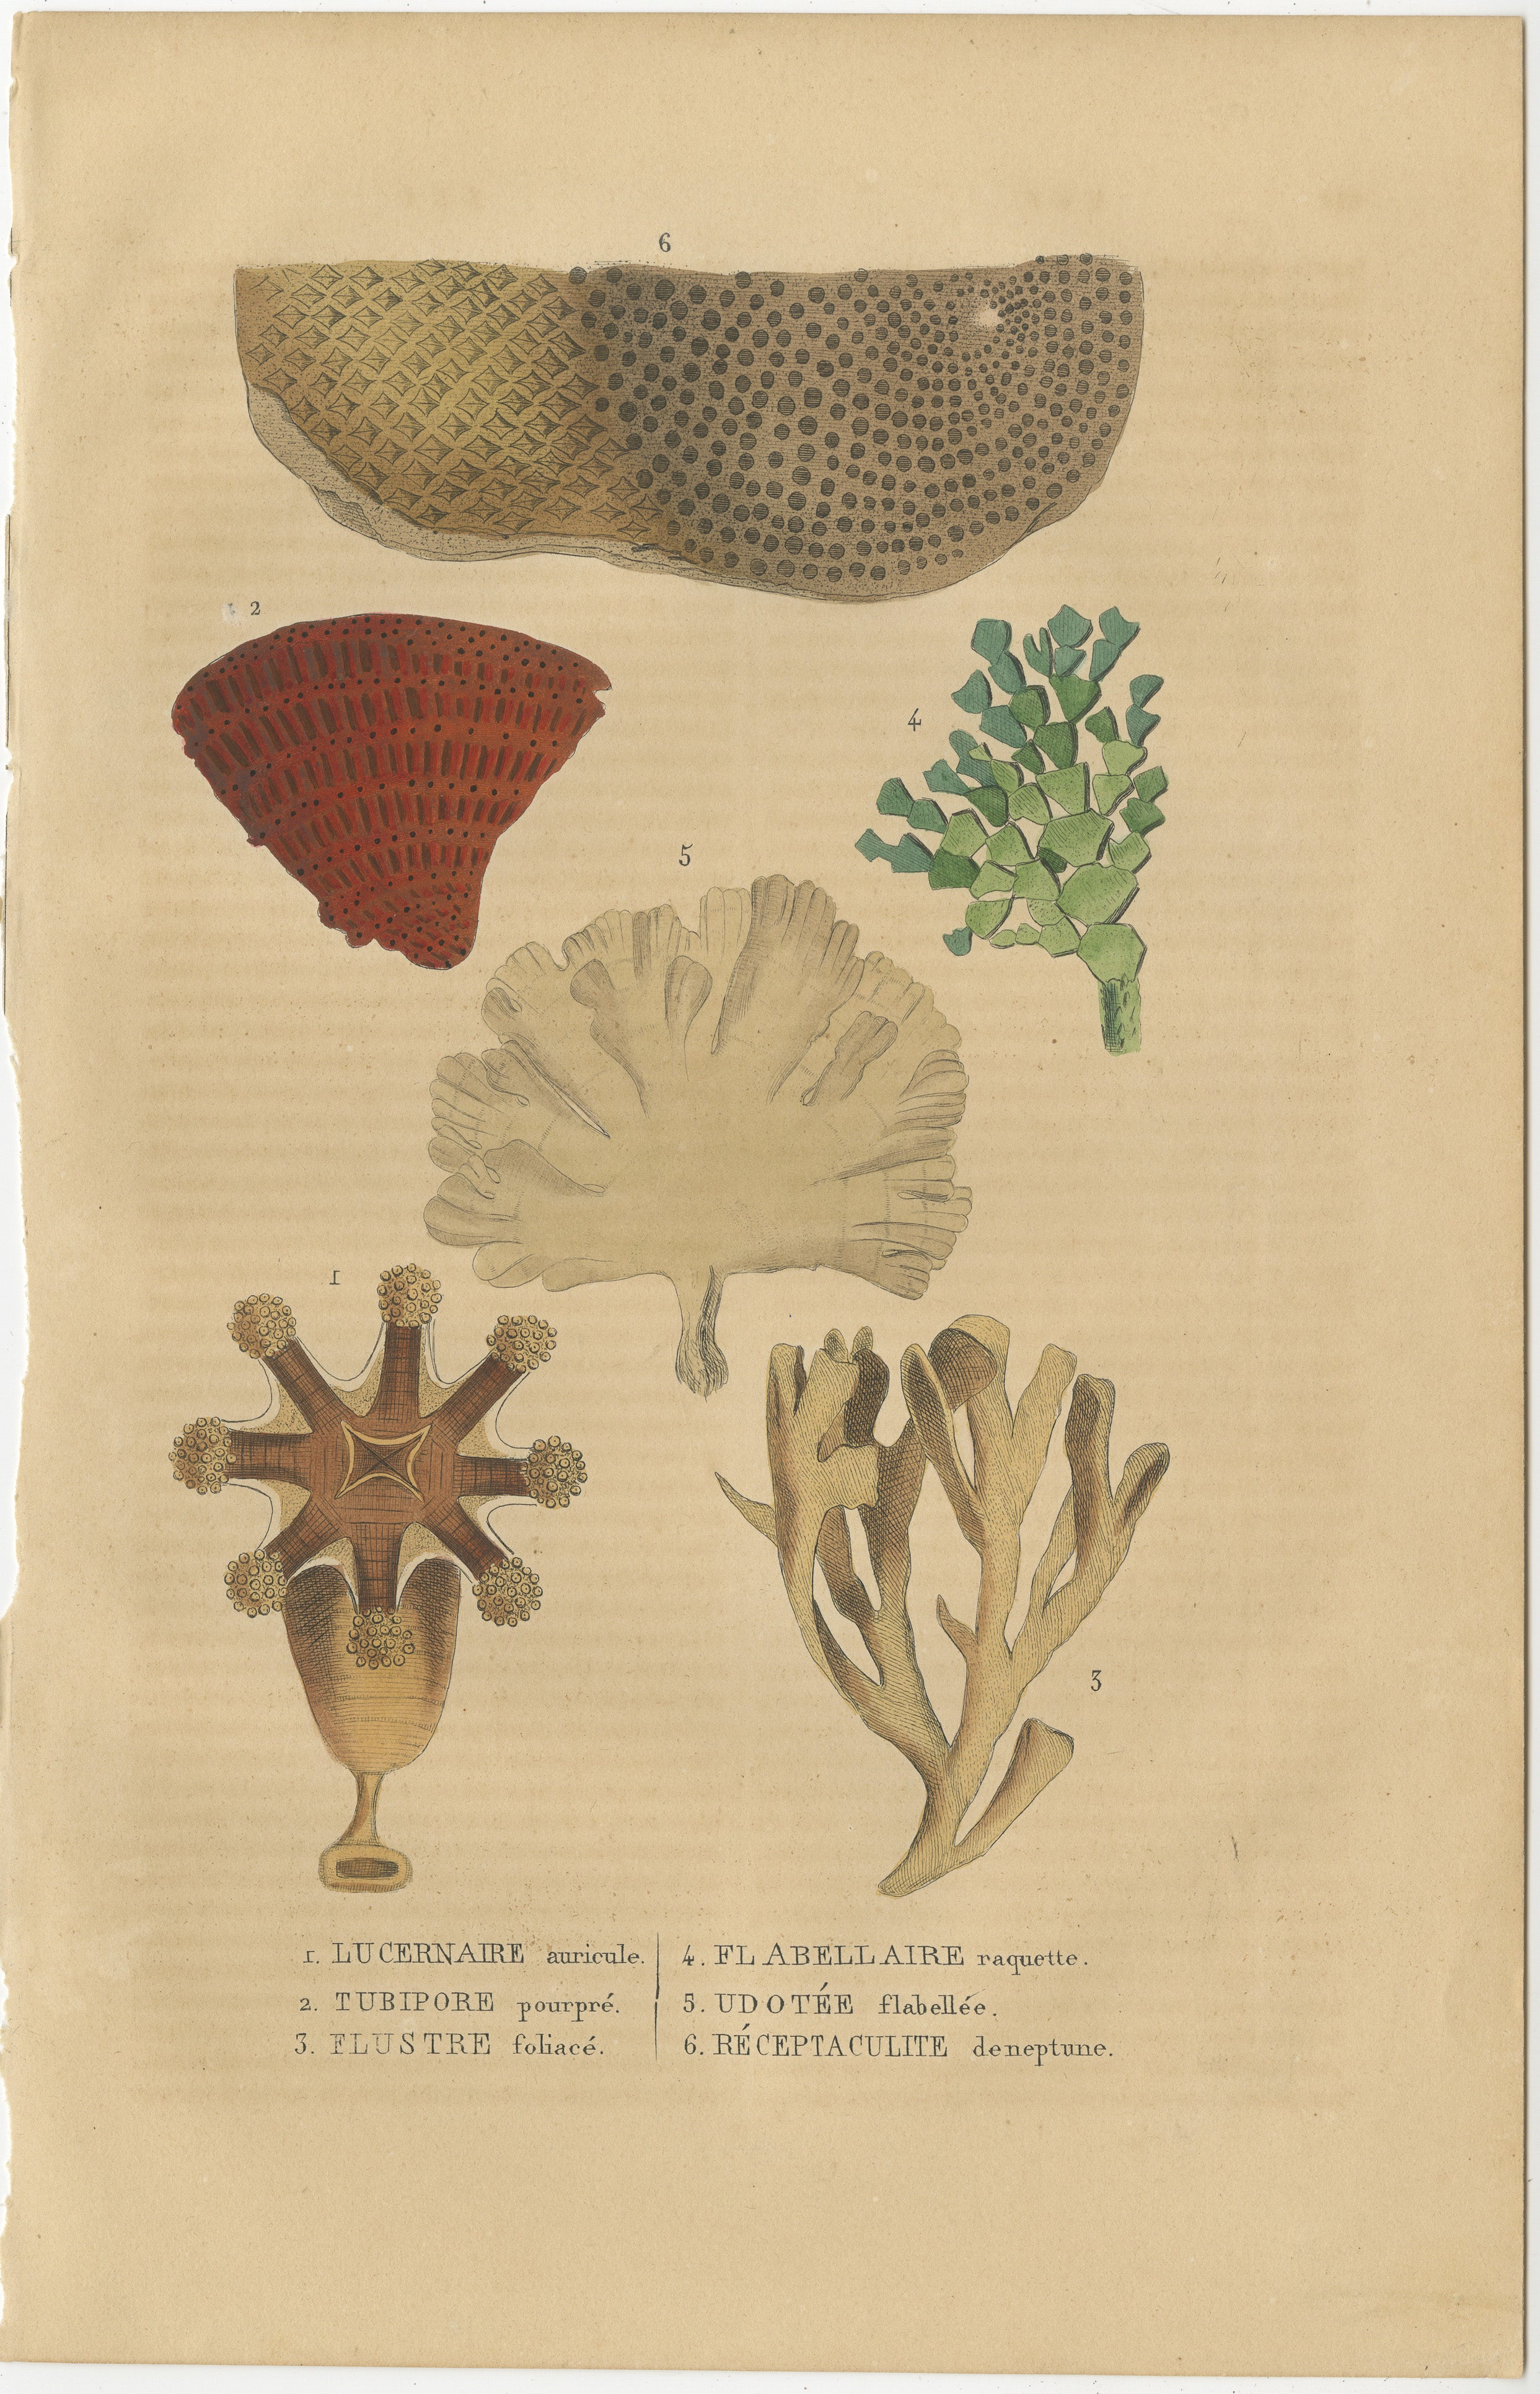 The image is a hand-colored engraving featuring various marine organisms, focusing on coral and similar marine life:

1. **Lucernaire auricule** - Possibly depicting a type of stalked jellyfish, which are known for their bell-shaped bodies attached